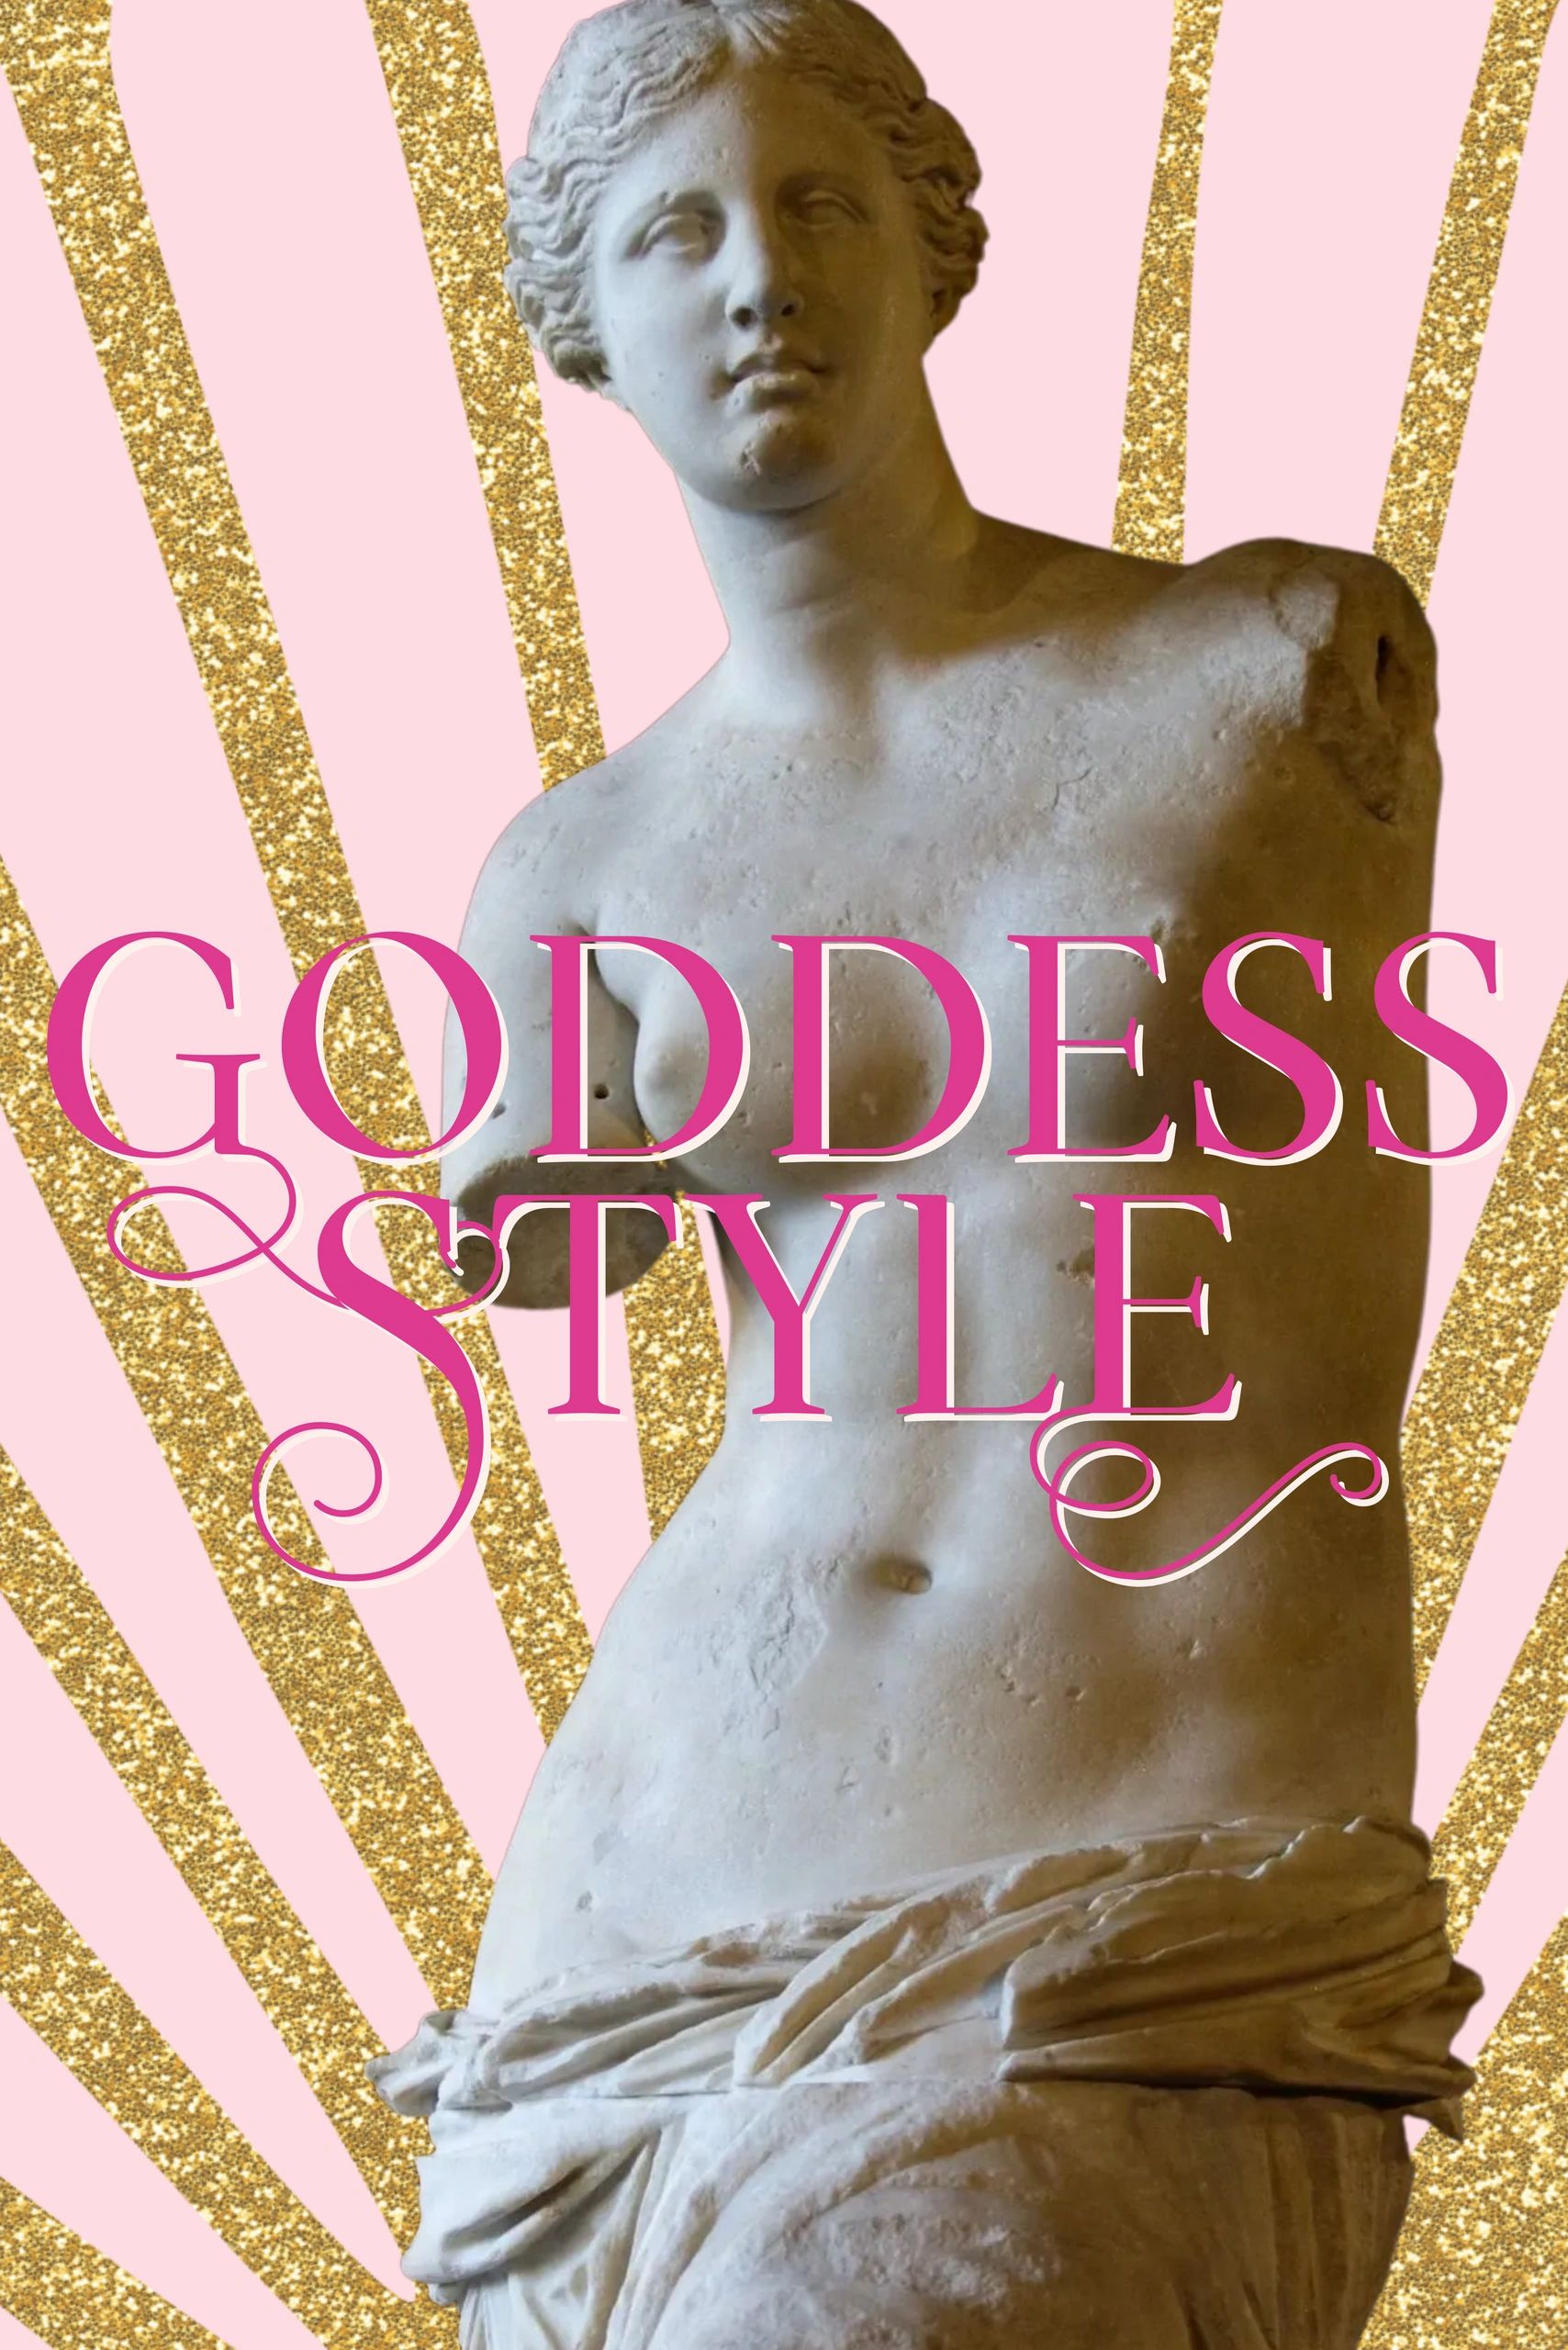 Want To Be A Goddess? Here Is Everything You Need!